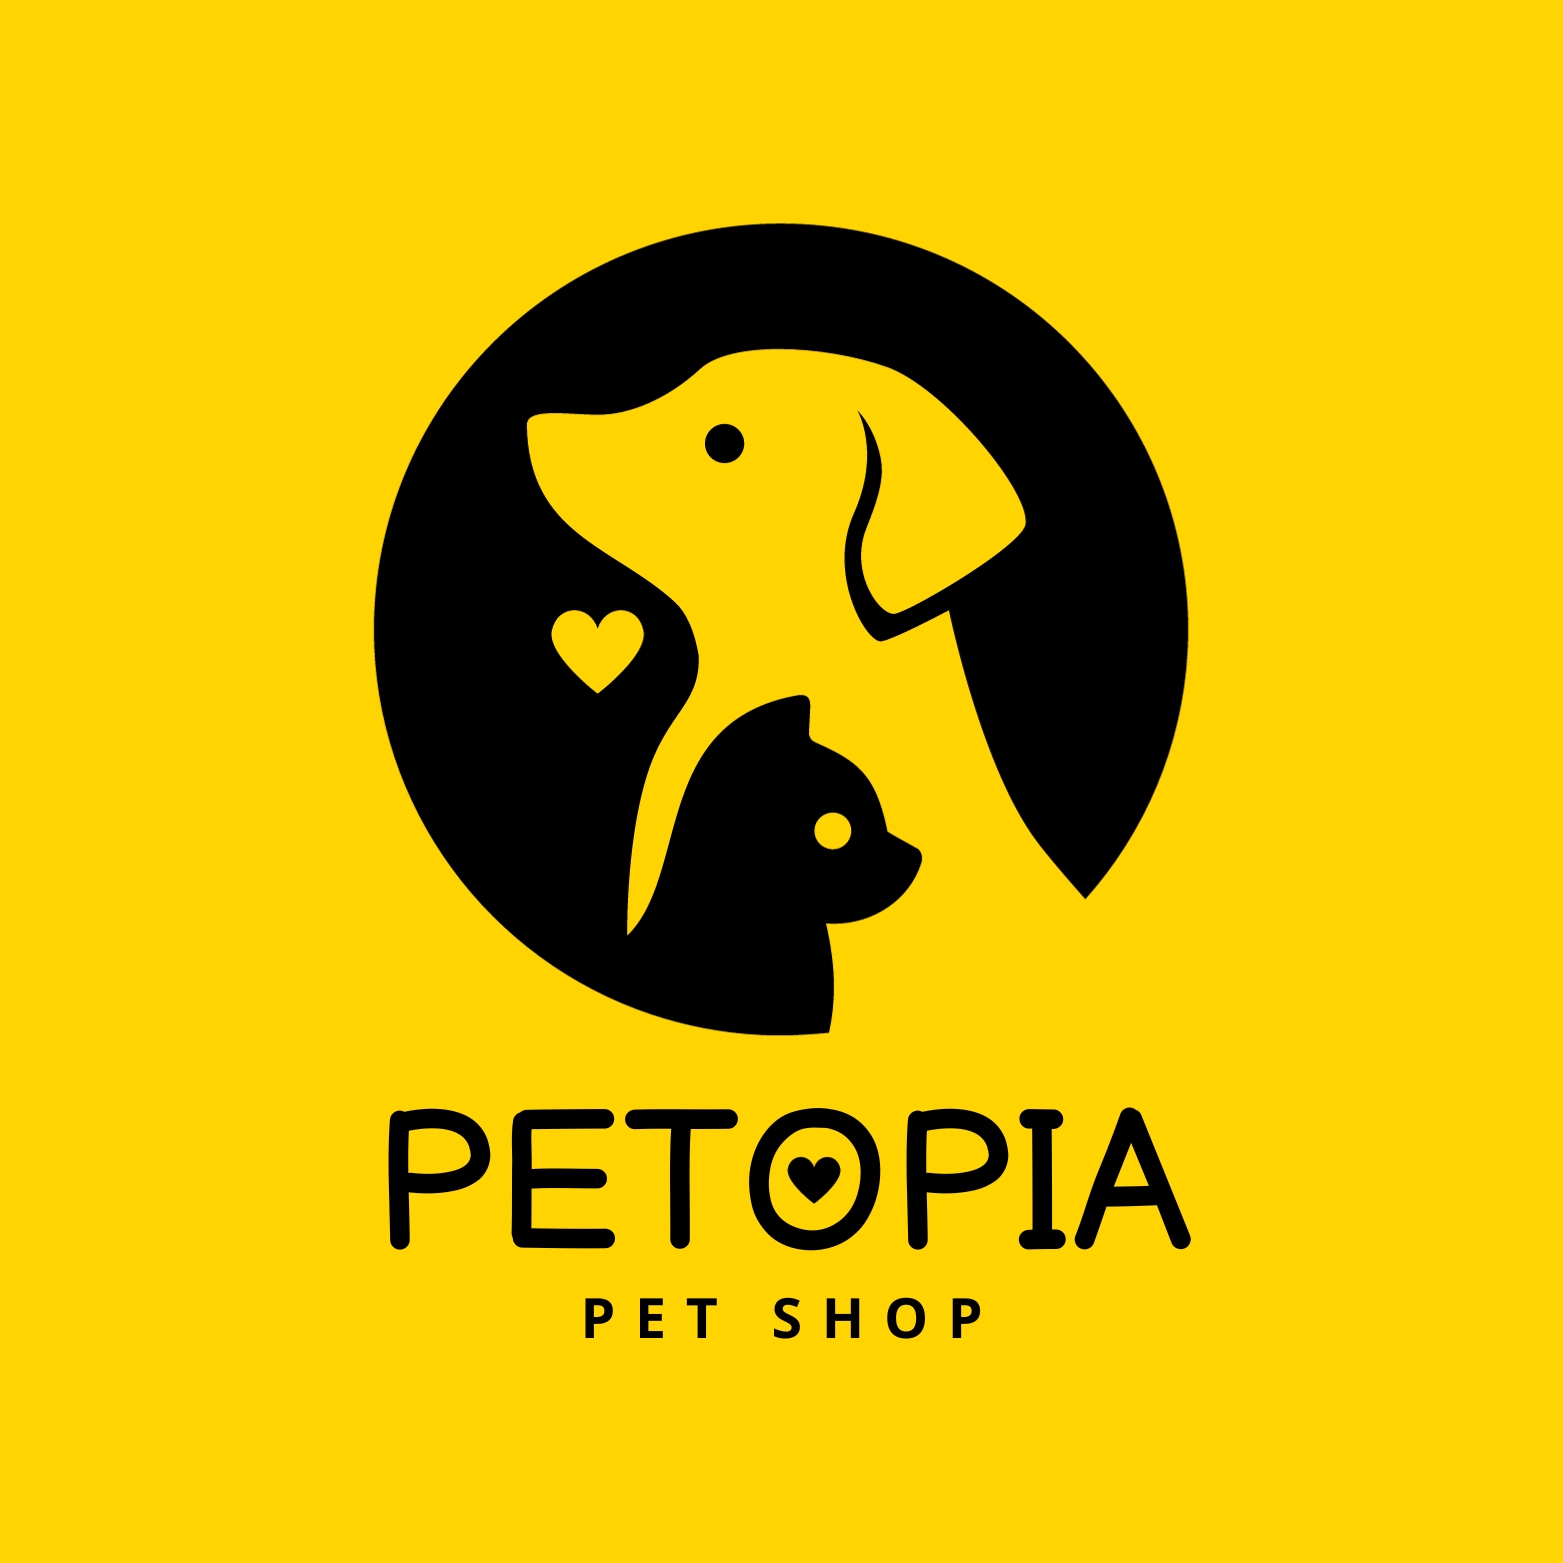 Yellow Black Simple Pet Logo Template cover image.